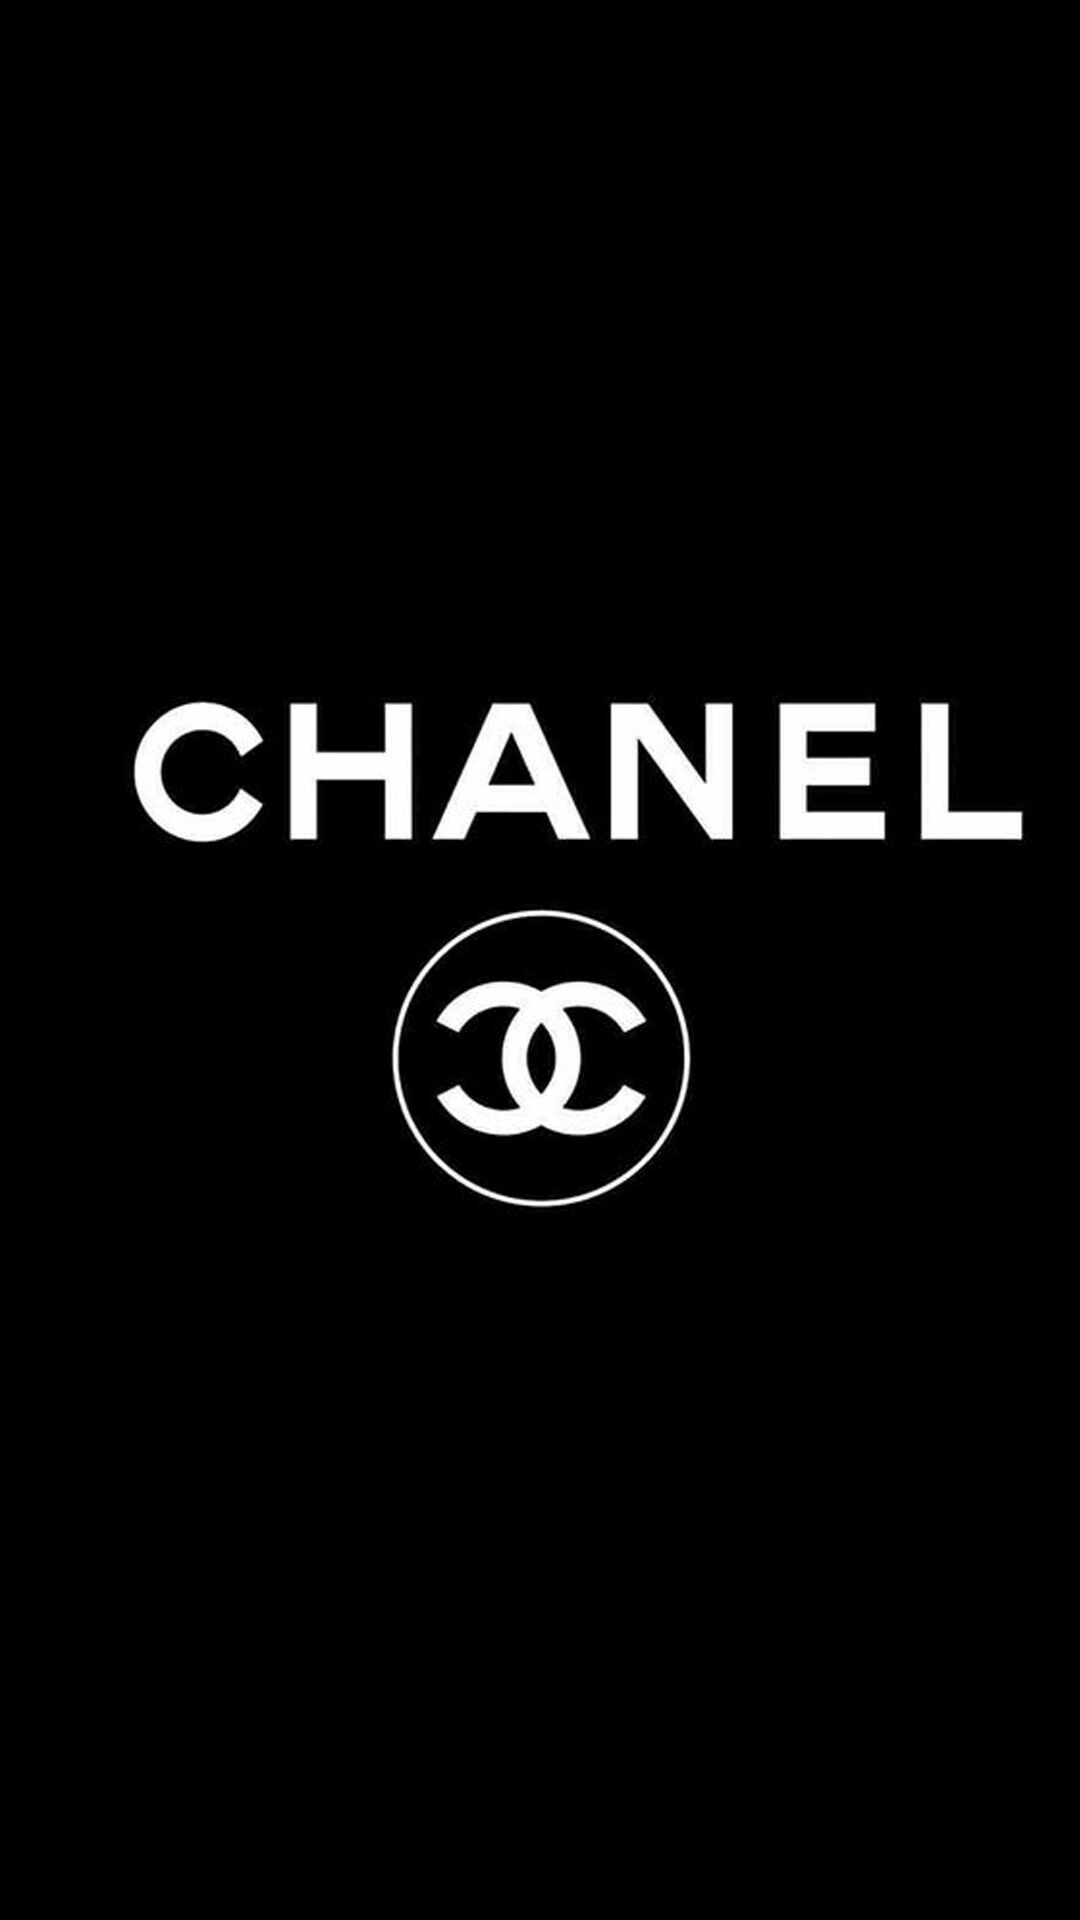 Chanel: One of the most prestigious French fashion brands in the world. 1080x1920 Full HD Wallpaper.